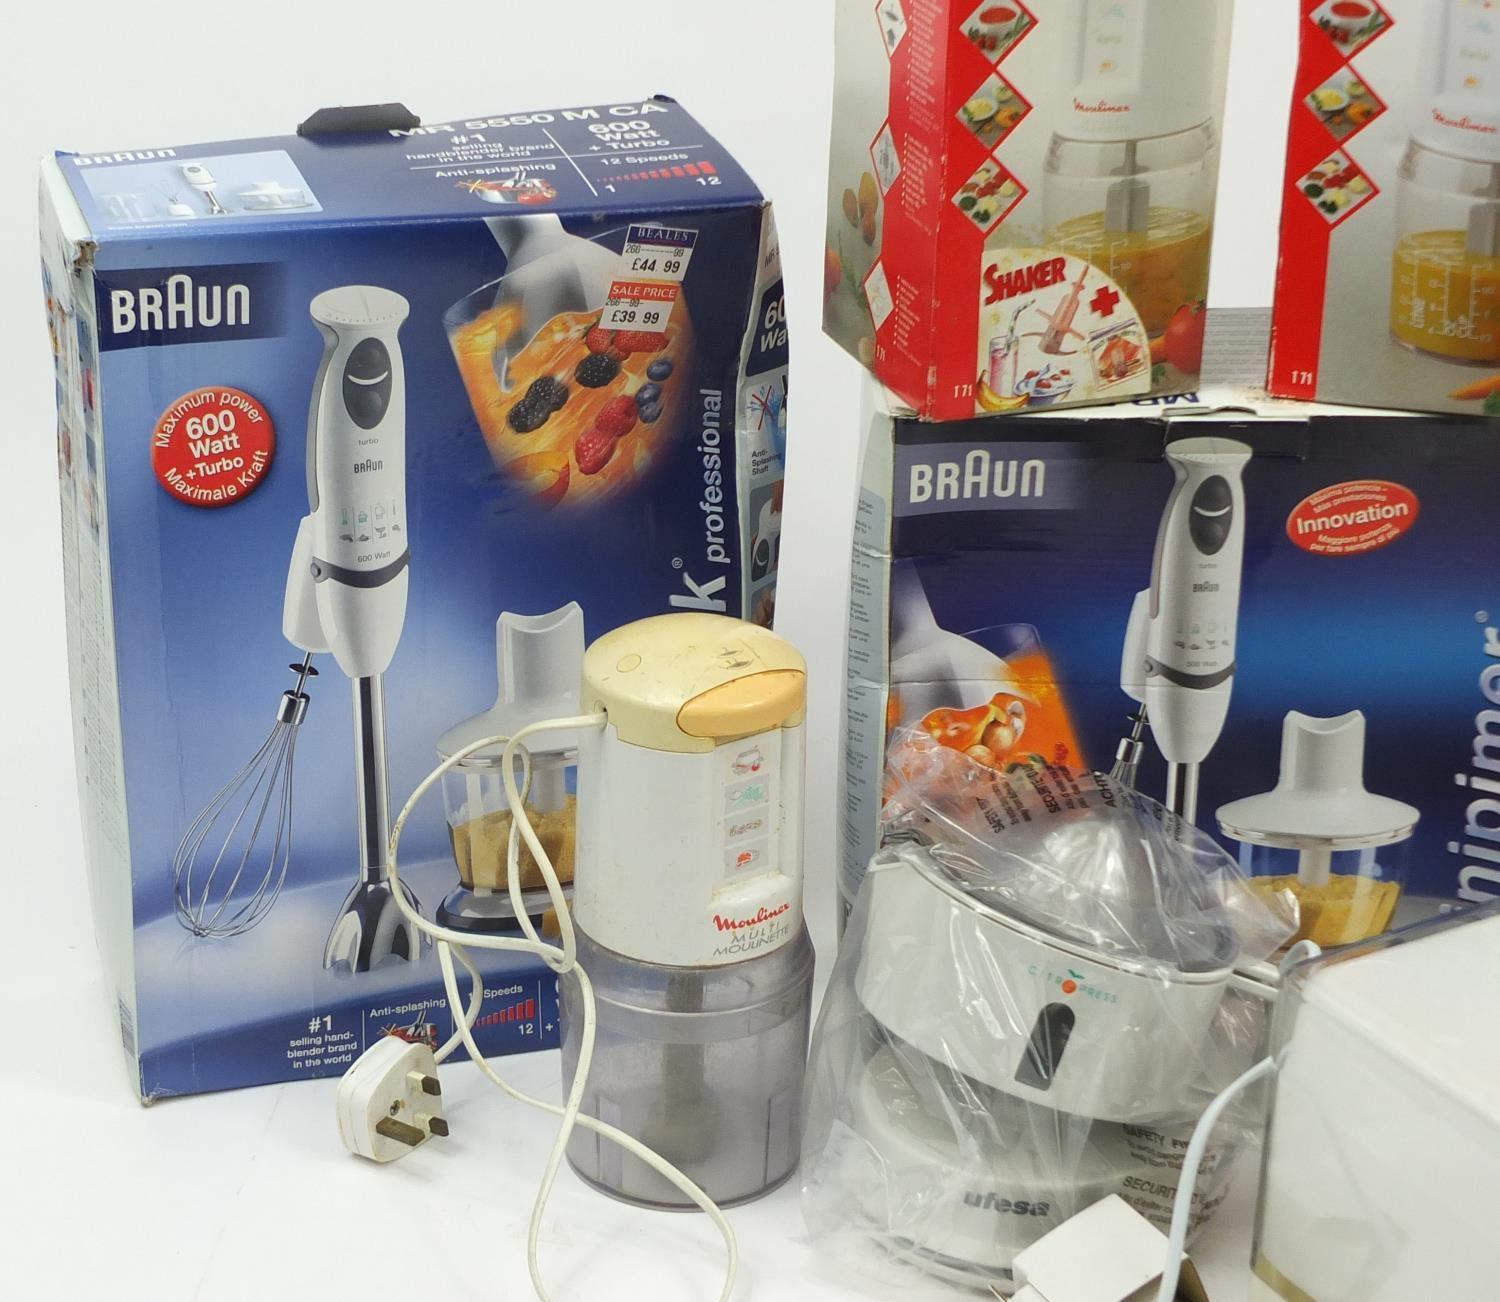 As new kitchen electricals including Magimix Compact 2100 and Braun Multiquick blender/whisk : For - Image 2 of 5